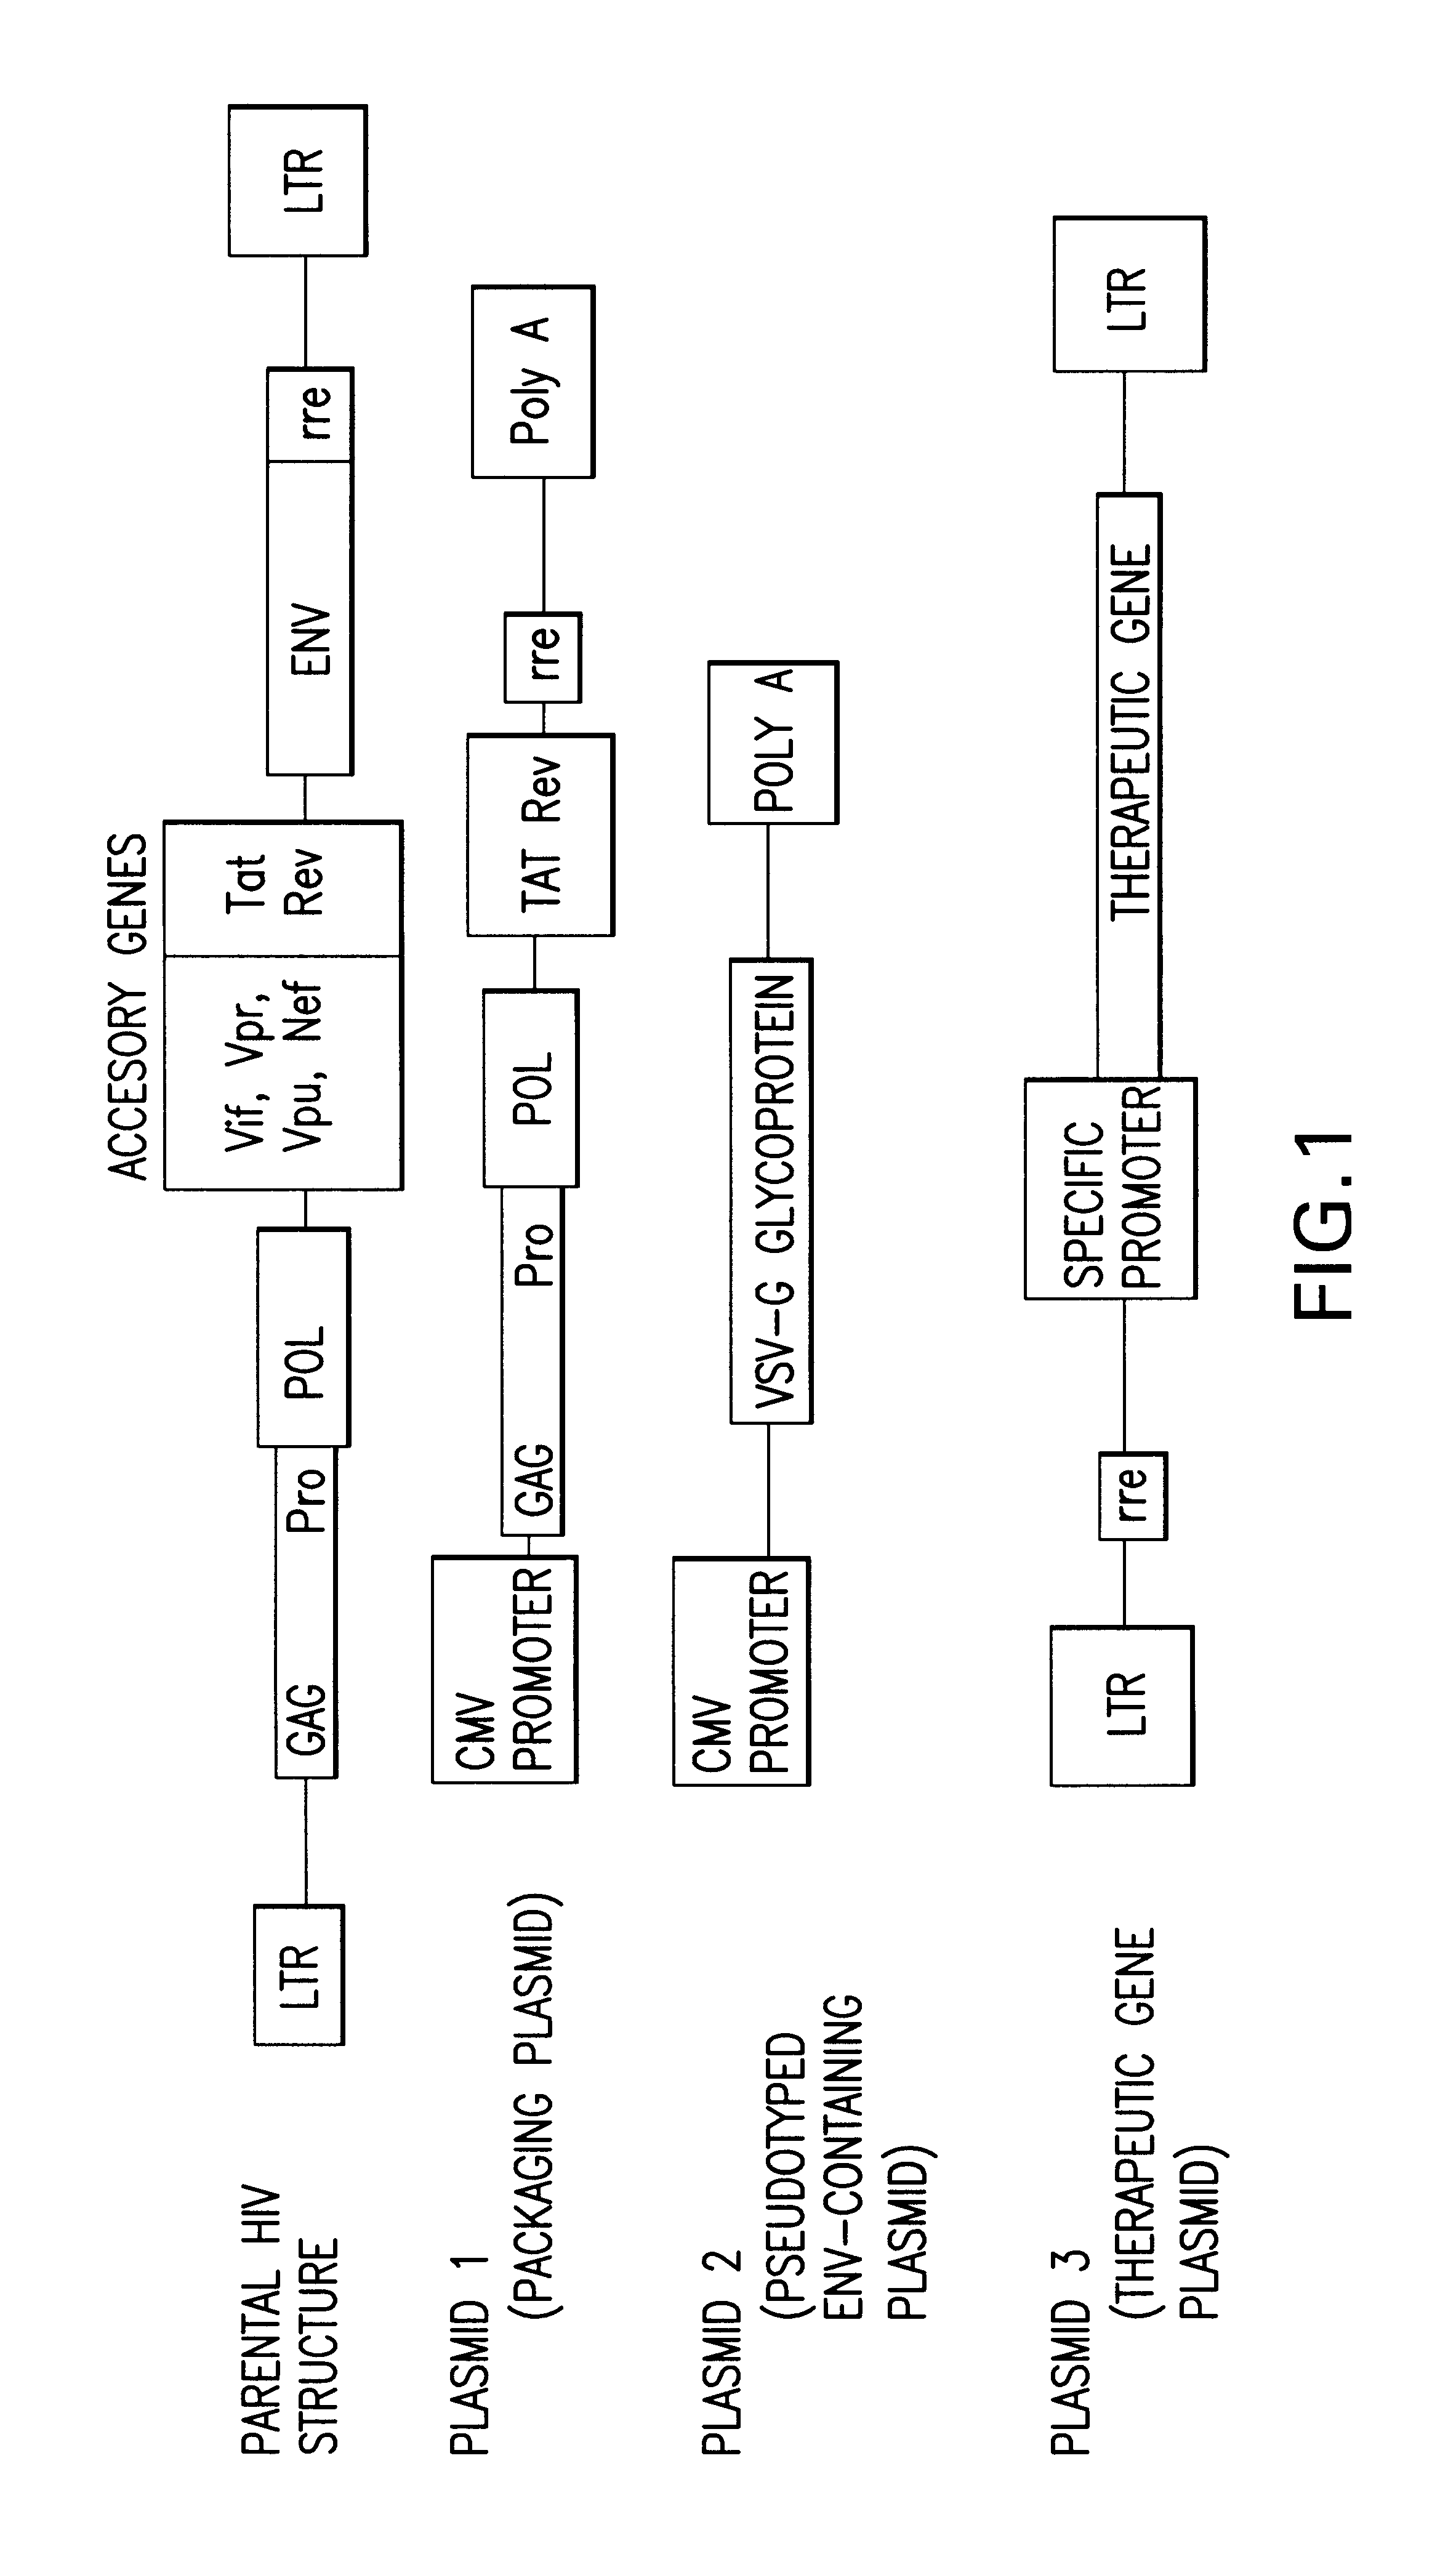 Lentiviral vector-mediated gene transfer and uses thereof